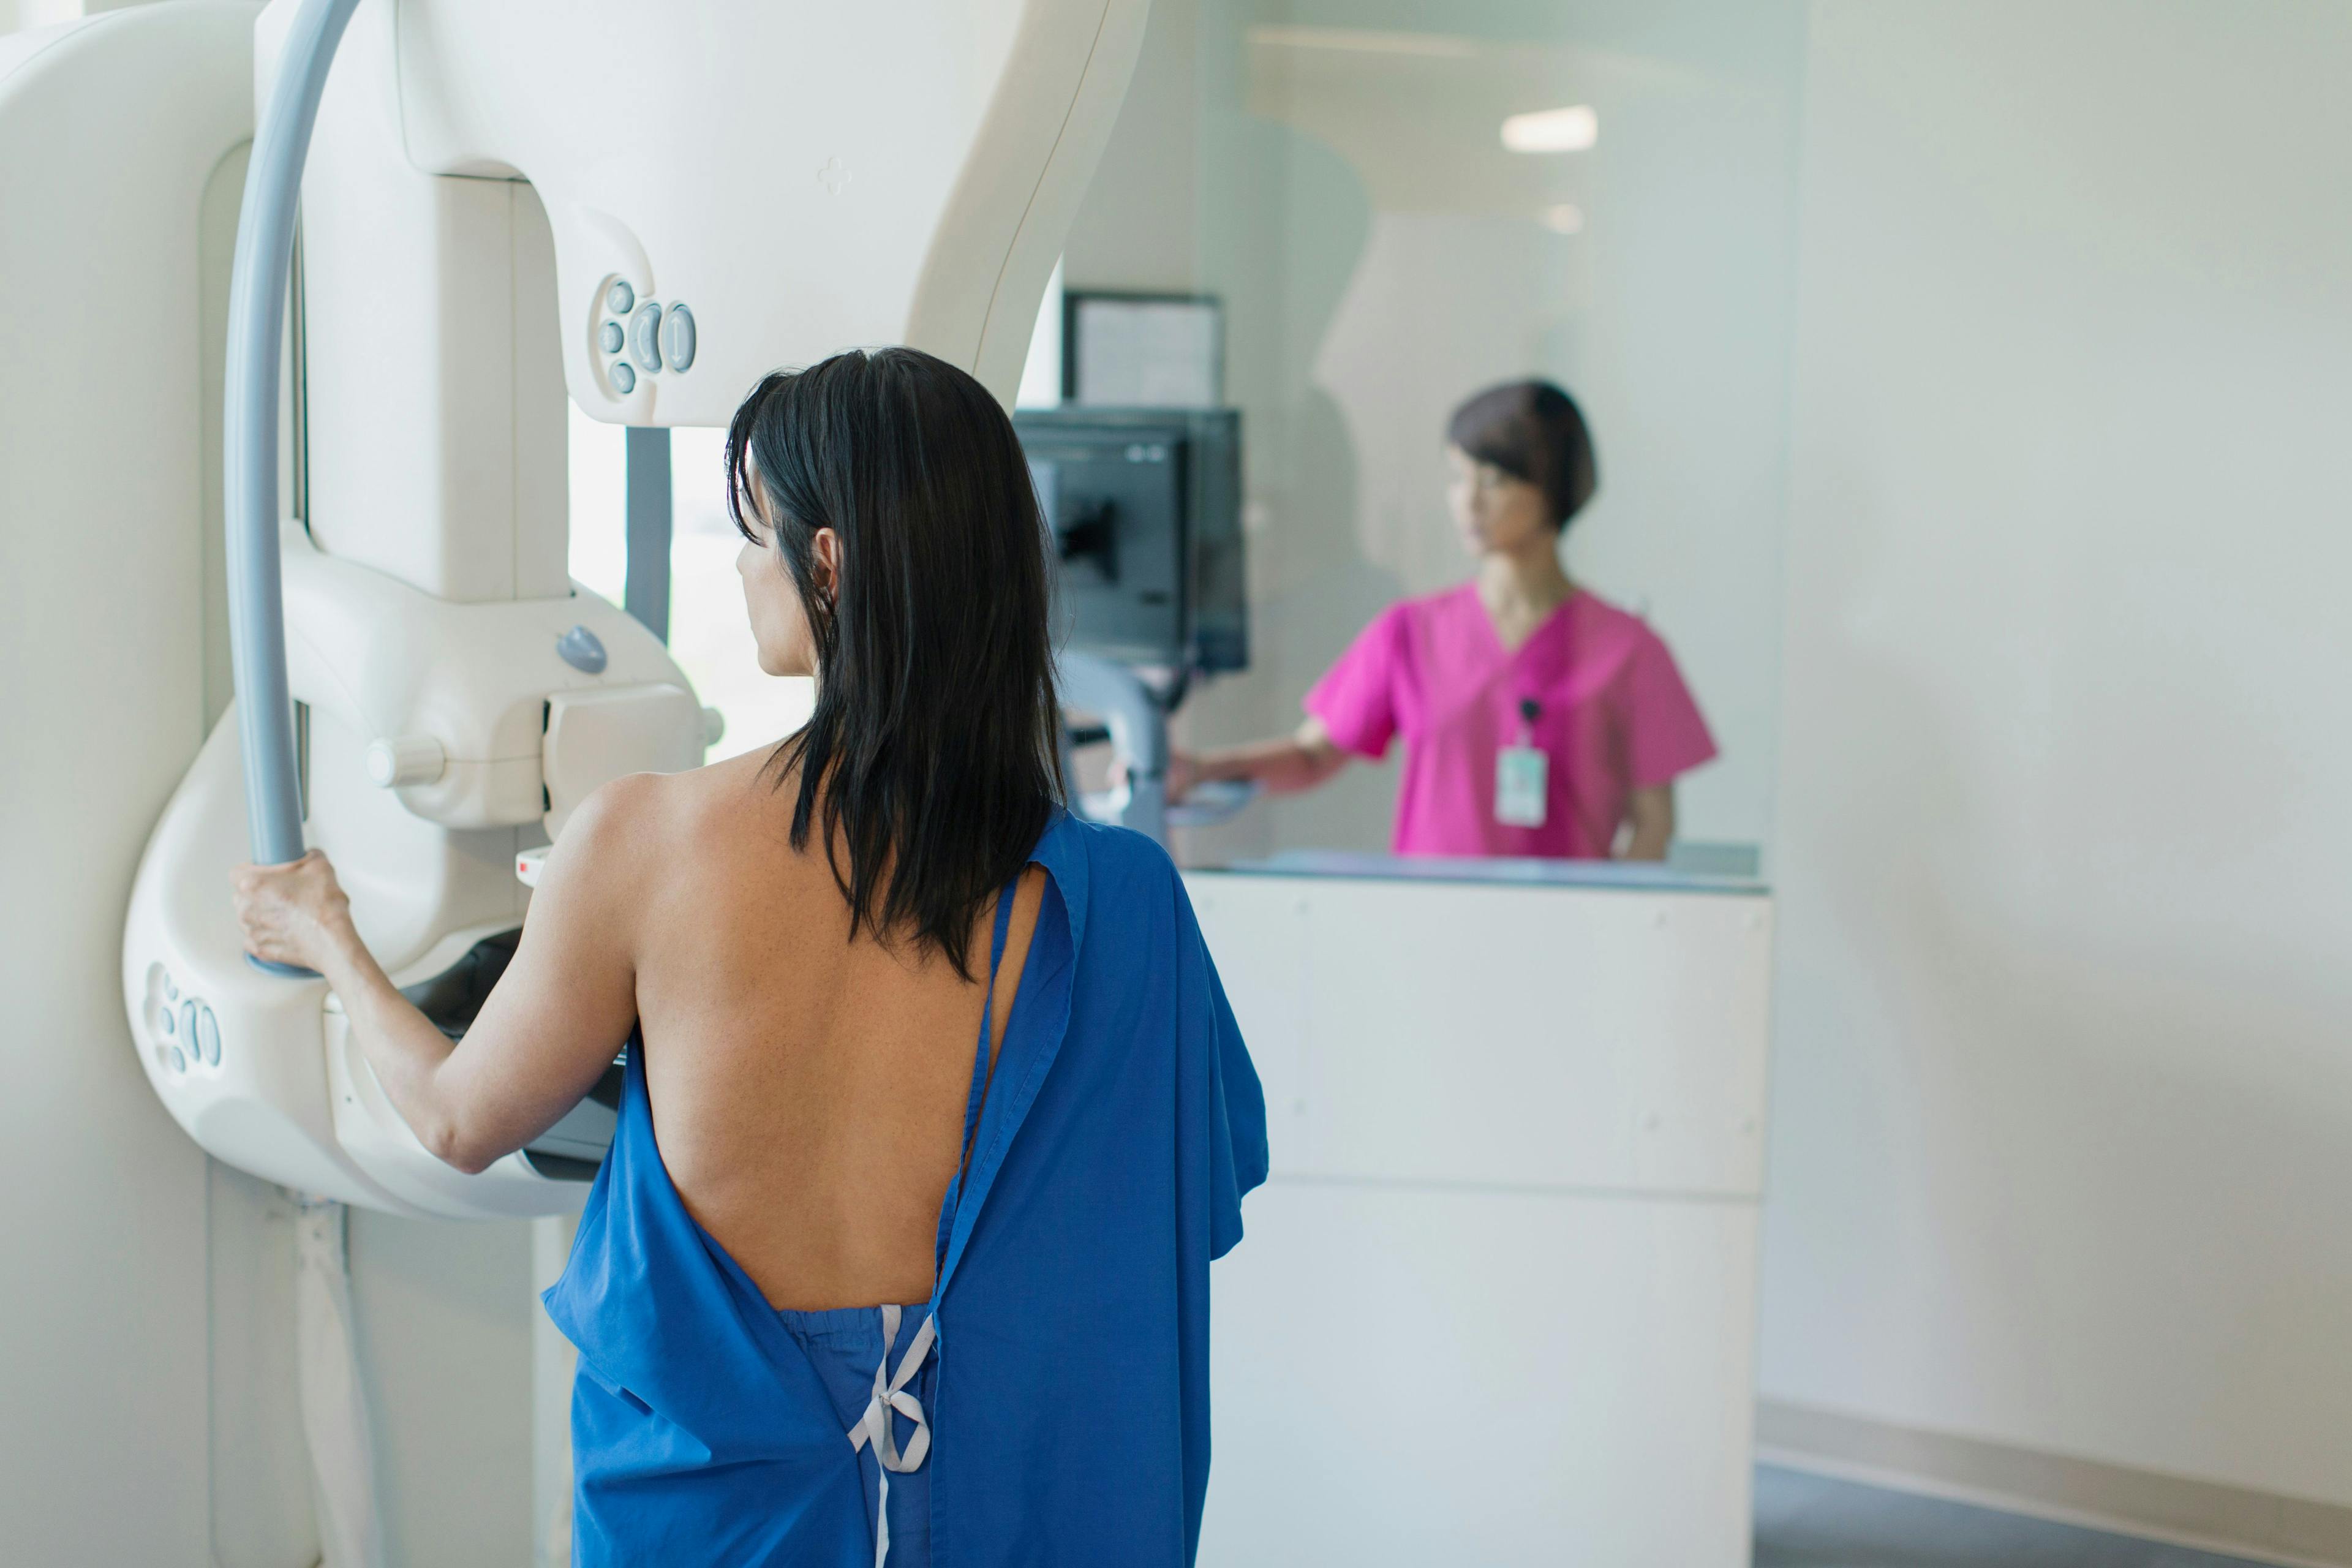 A federal advisory panel suggests women should begin getting screened for breast cancer at age 40, instead of age 50. (Image credit: ©Hero Images - stock.adobe.com)